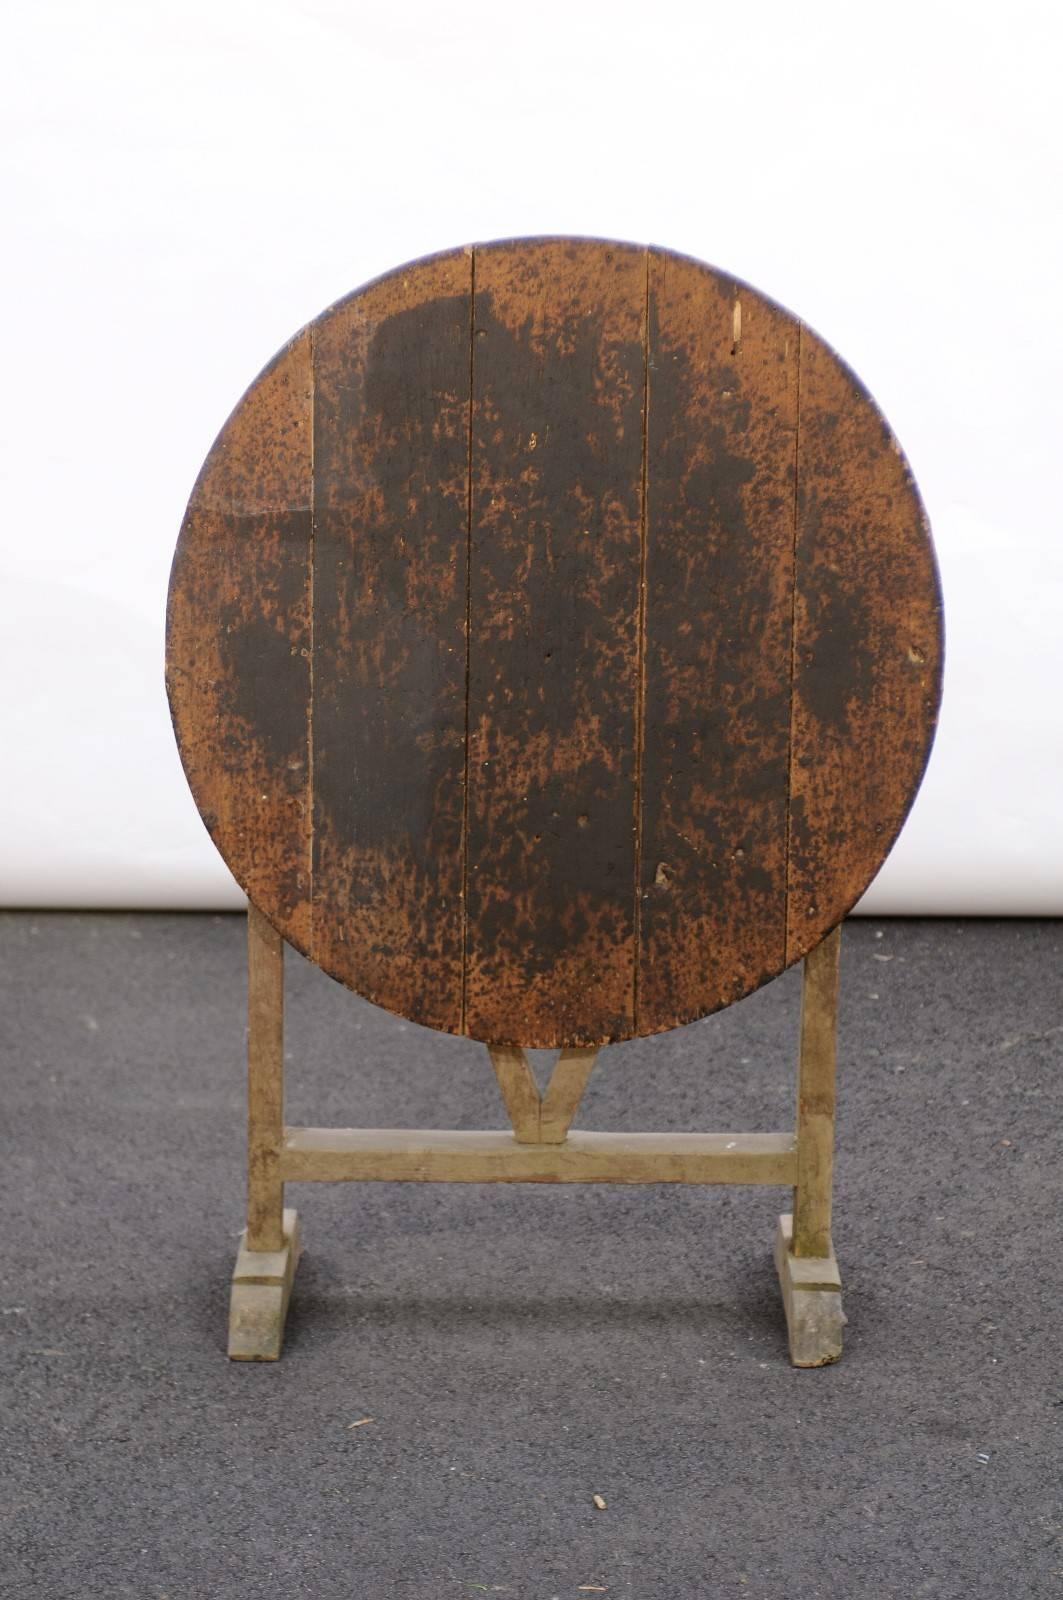 This antique French pine wine tasting table from the late 19th century features a round tilt-top (very slightly oval in fact) over a butterfly wedge trestle base. With its elegant patina and solid build, this rustic and weathered piece will give a